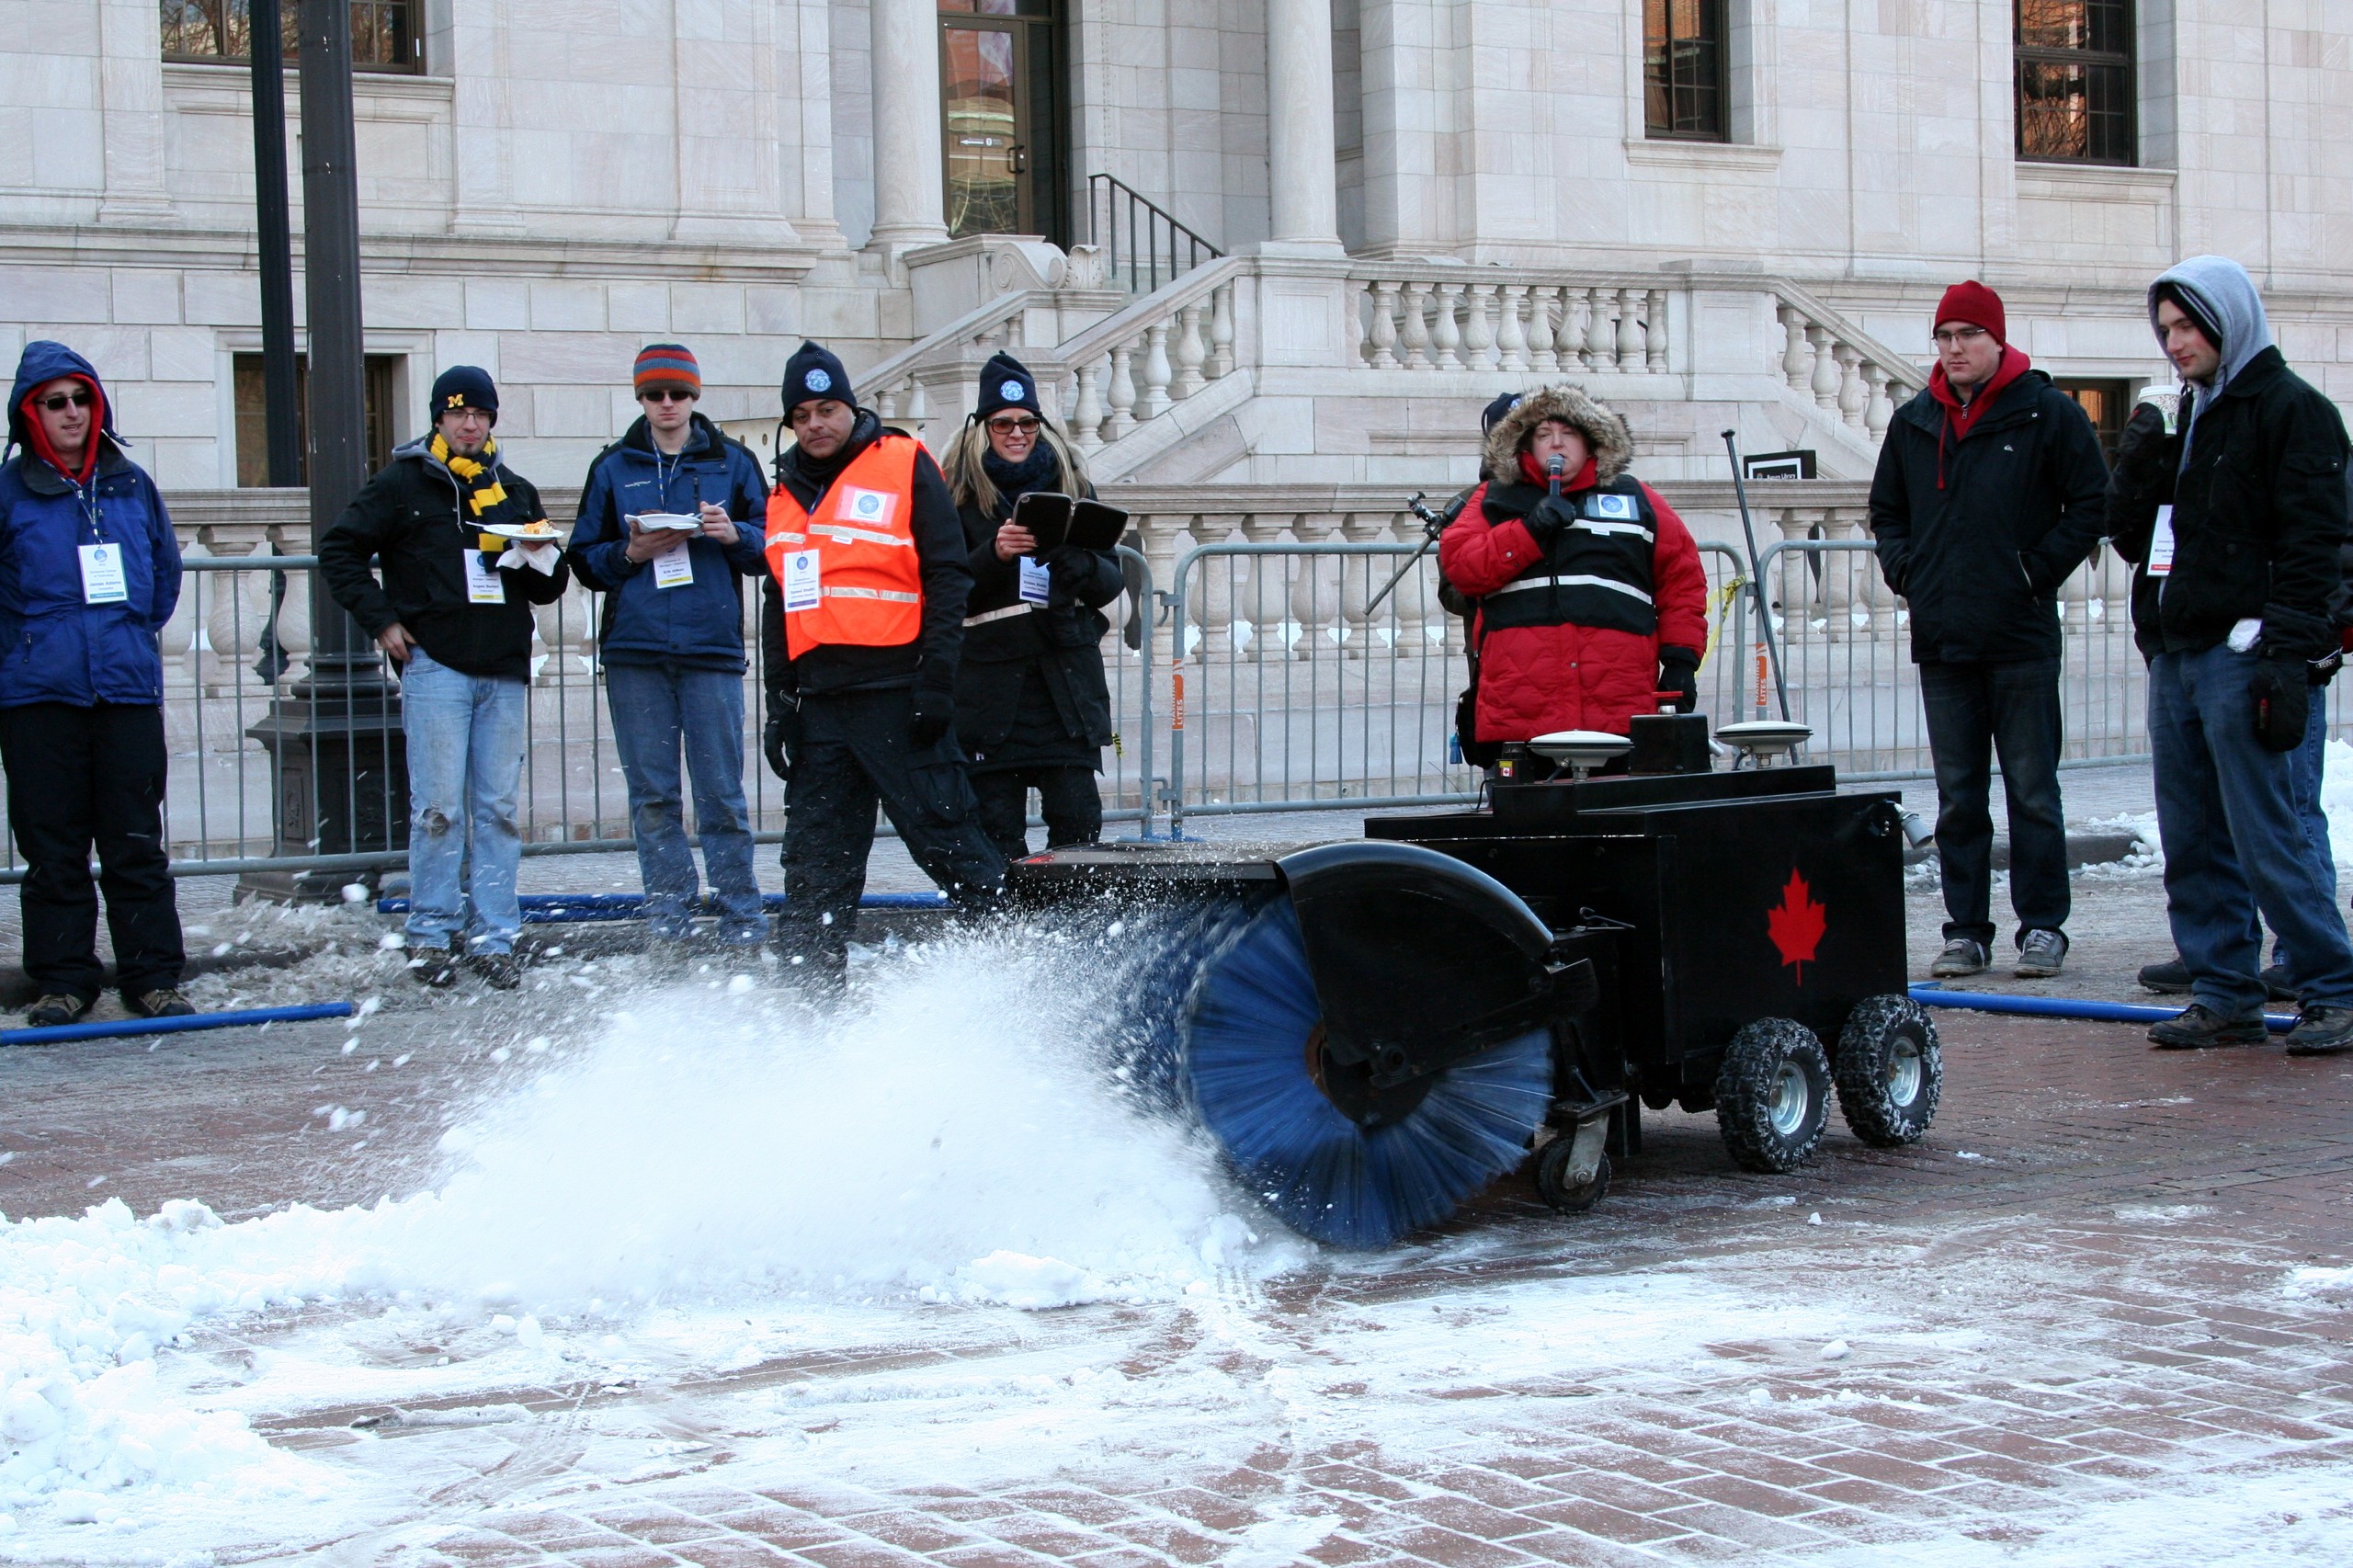 An autonomous snow sweeping machine moves through a town square, while a crowd watches.